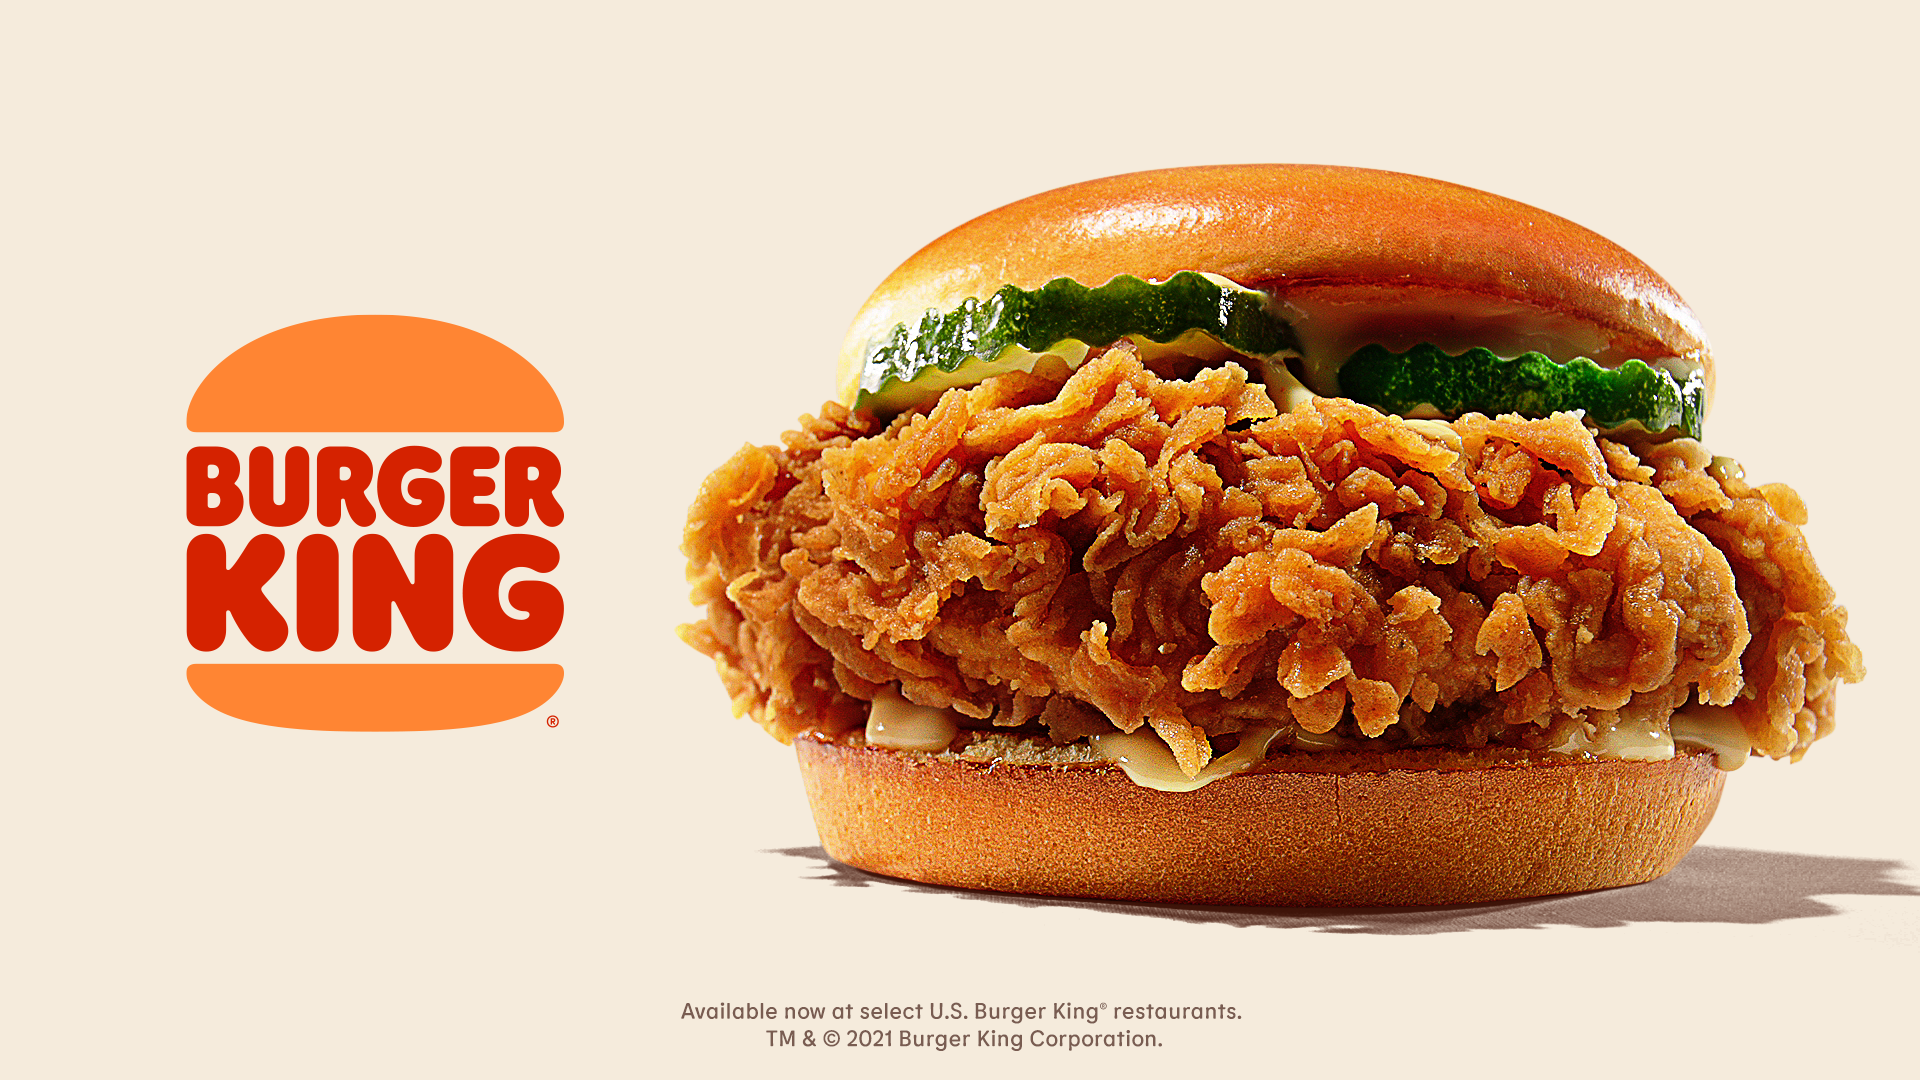 Burger King confirms new chicken sandwich for later this year, says “handmade bread” will set it apart